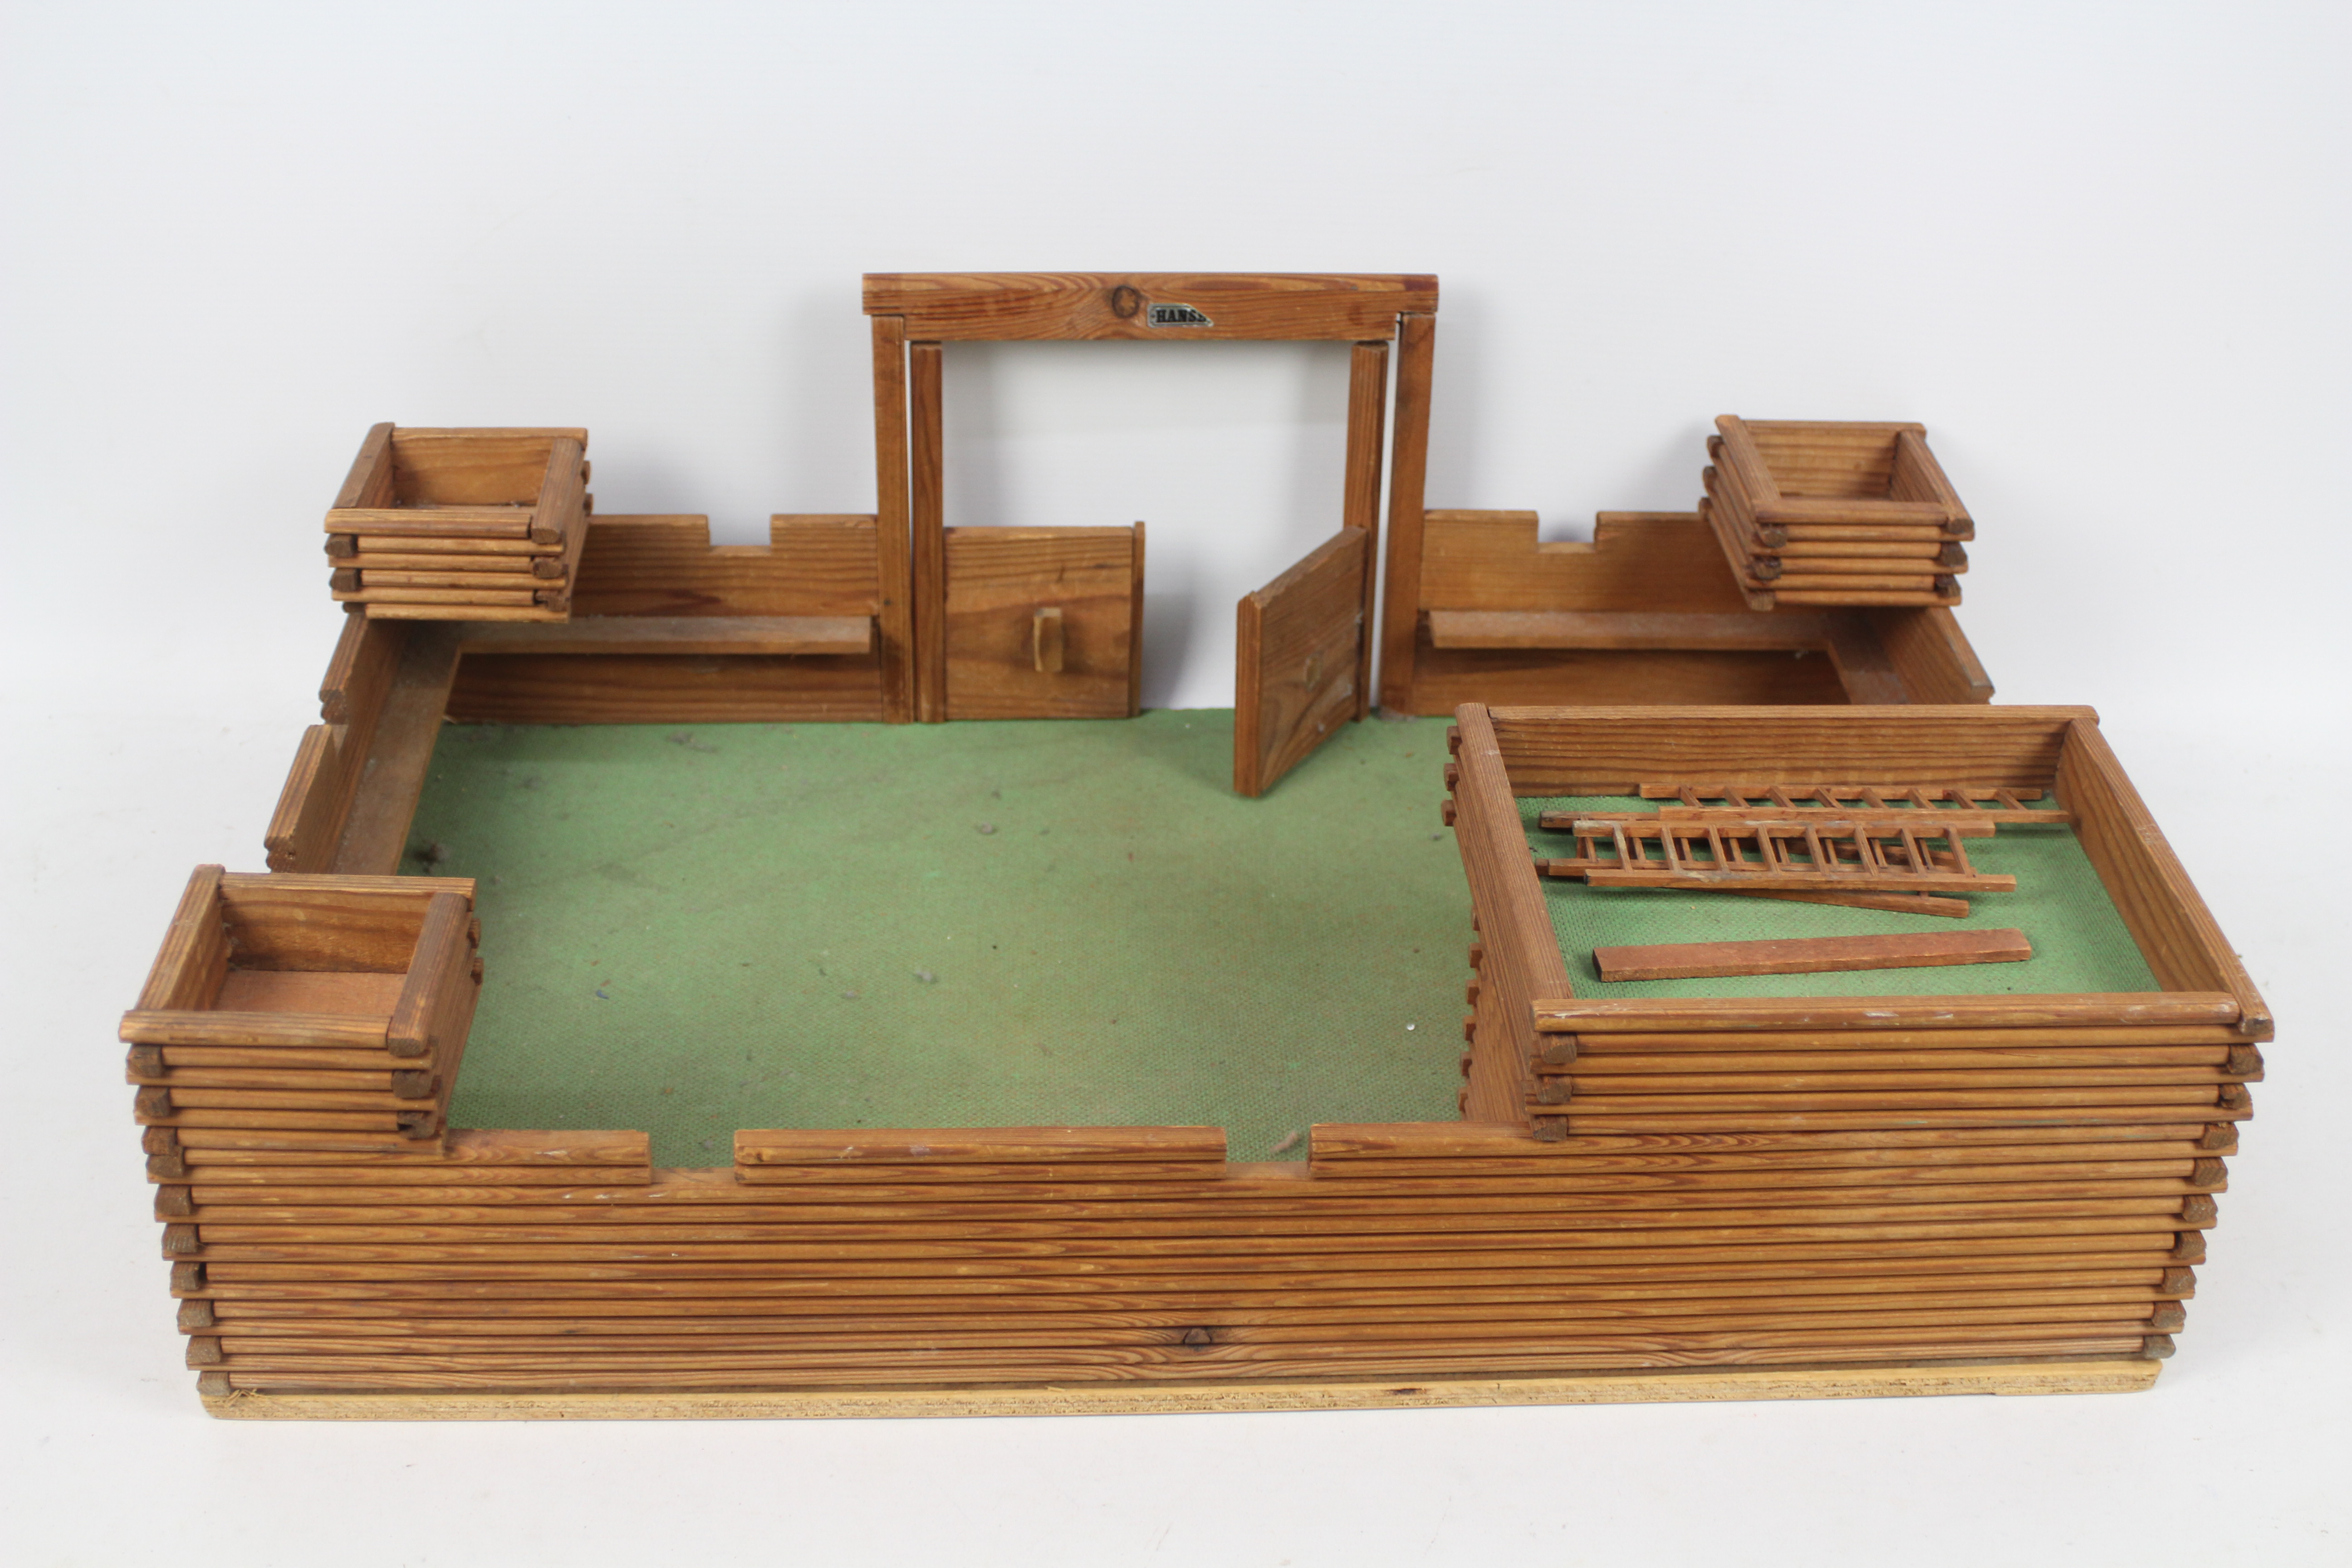 Hanse (Denmark) - A vintage unboxed wooden toy fort ' Fort Laredo' by the Danish manufacturer Hanse. - Image 2 of 8